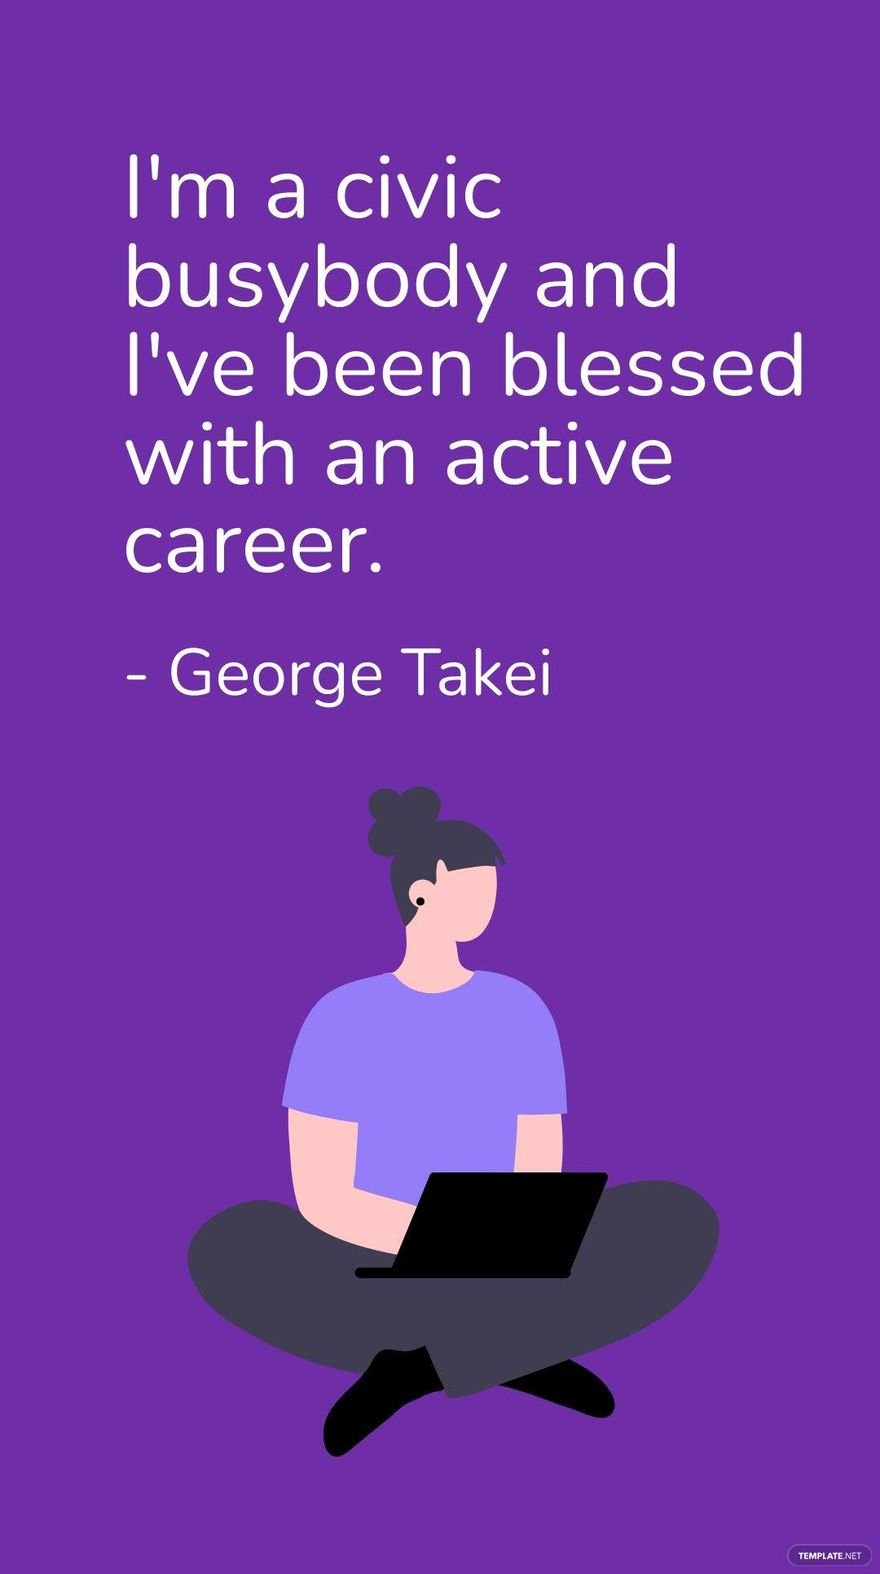 George Takei - I'm a civic busybody and I've been blessed with an active career. in JPG